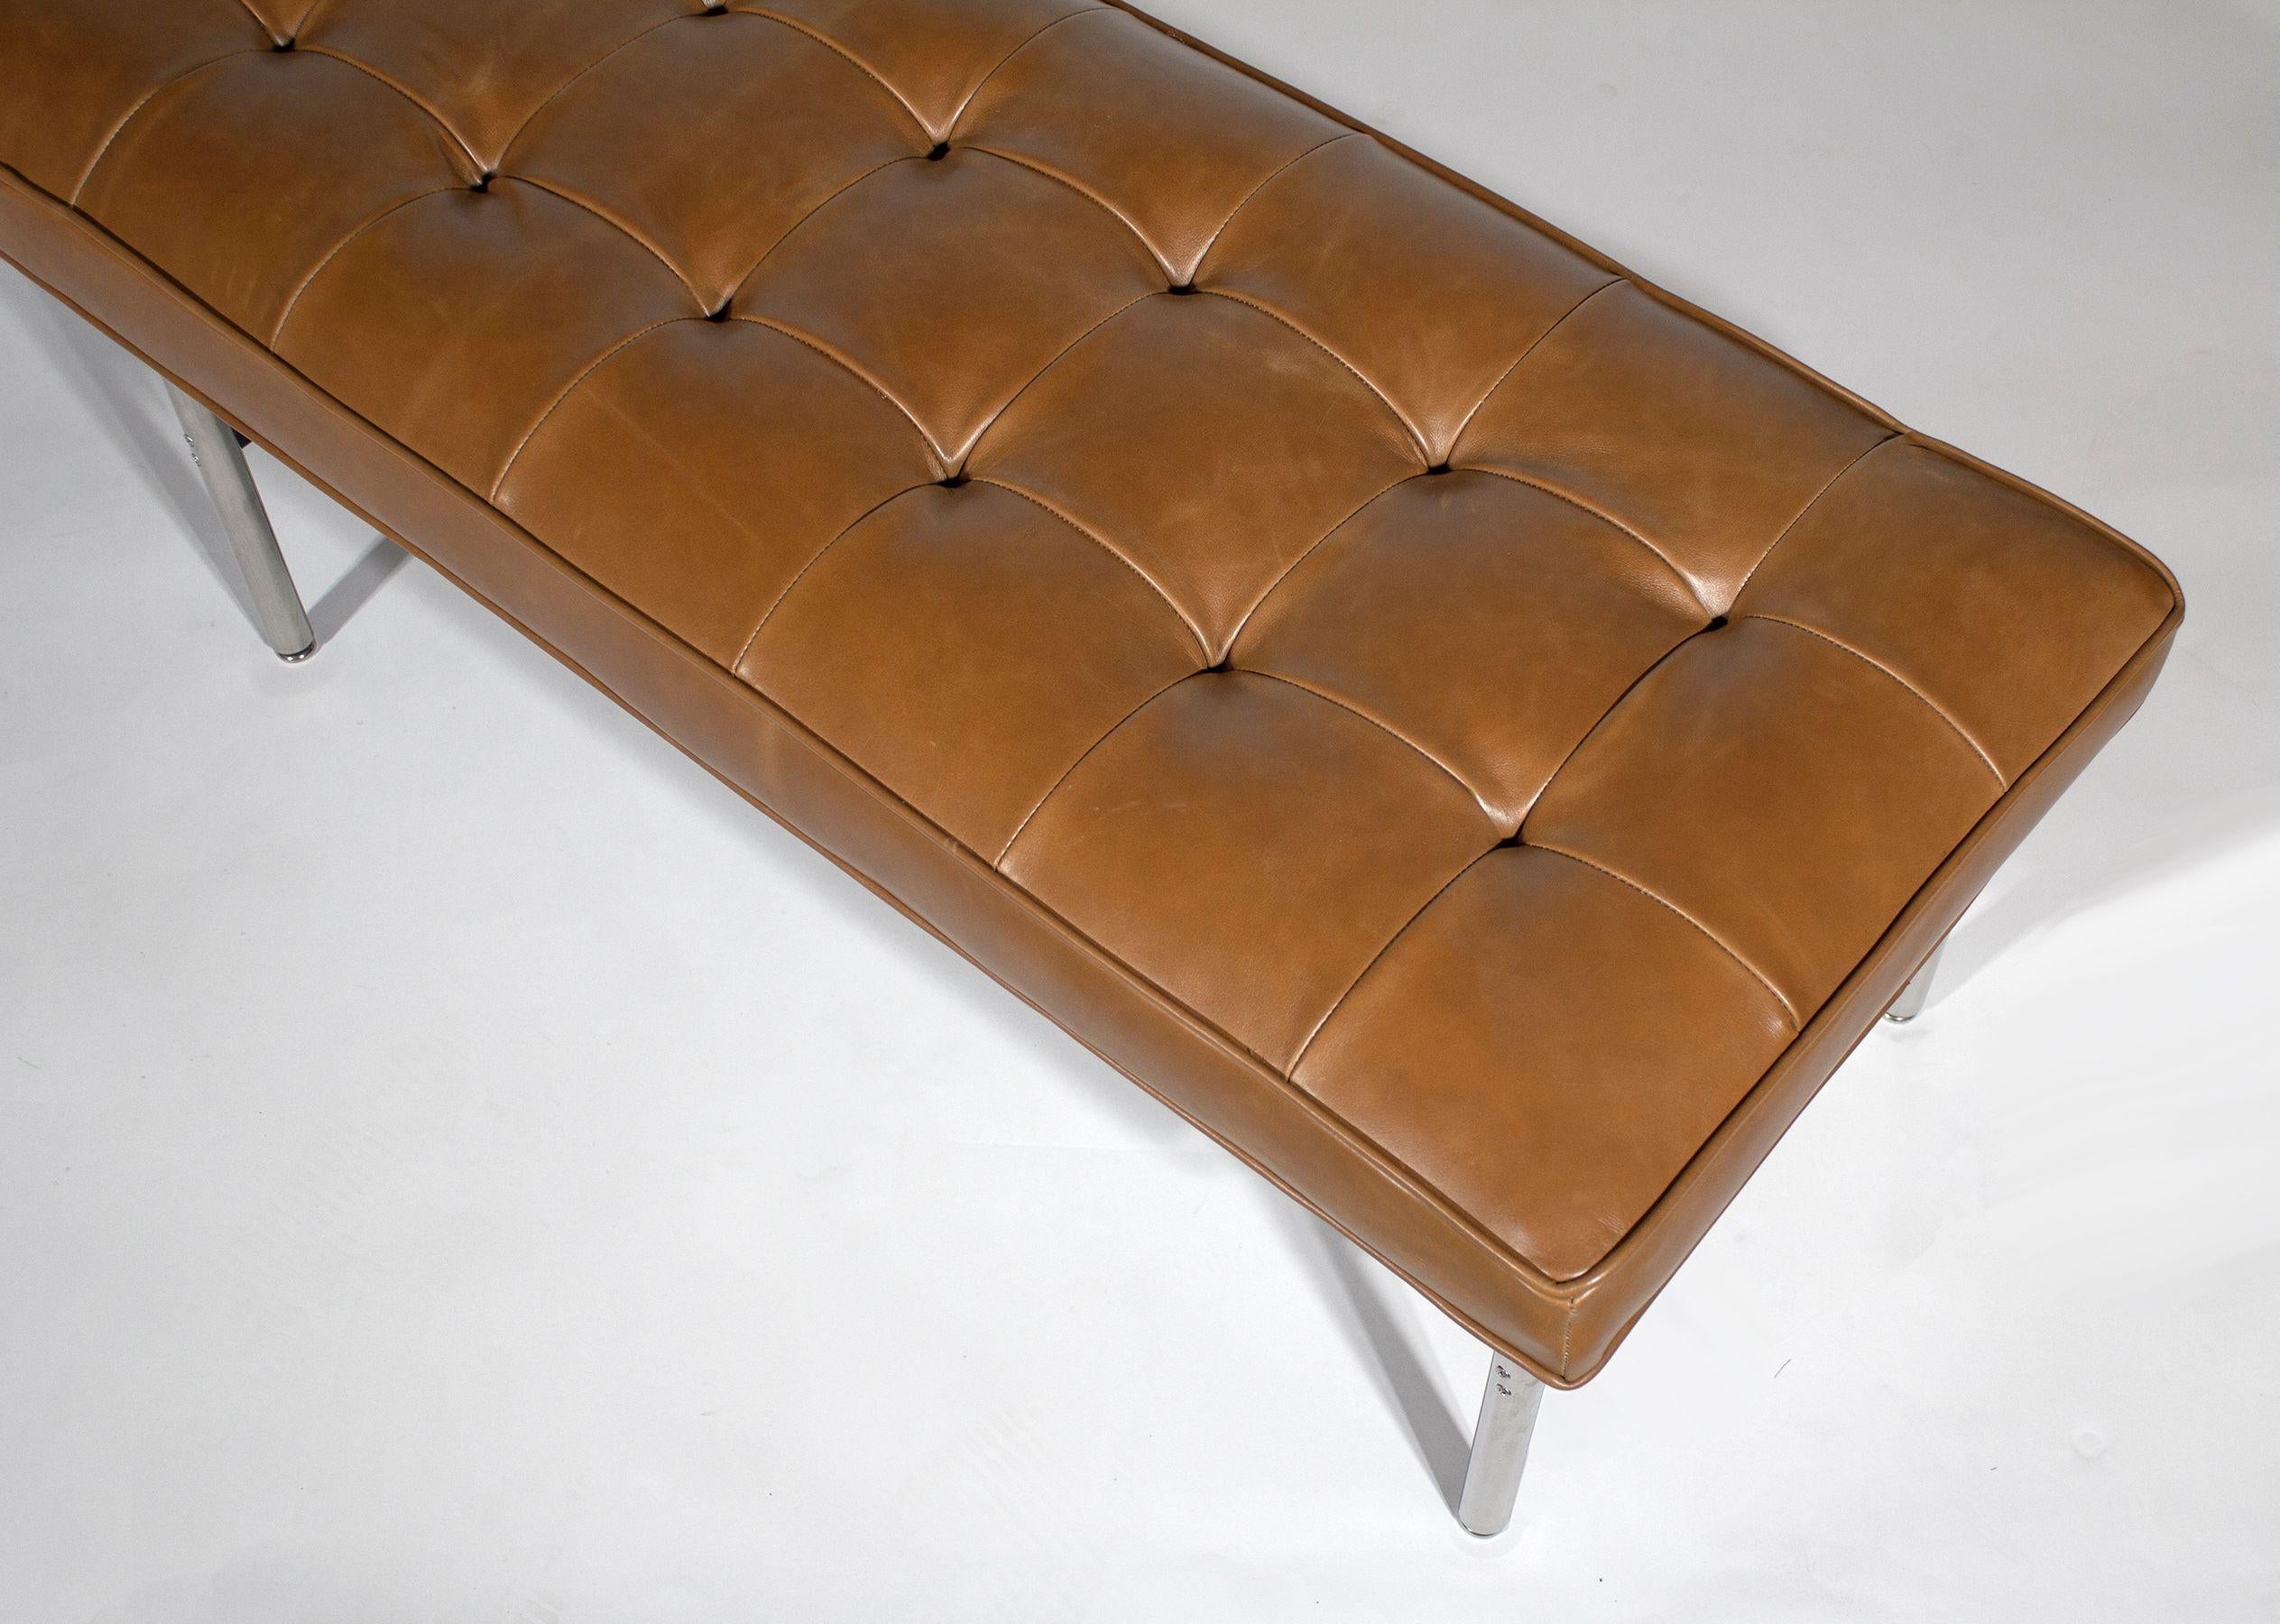 20th Century Laverne International Long Bench in Box-Tufted Camel Leather NYC Series 1960s